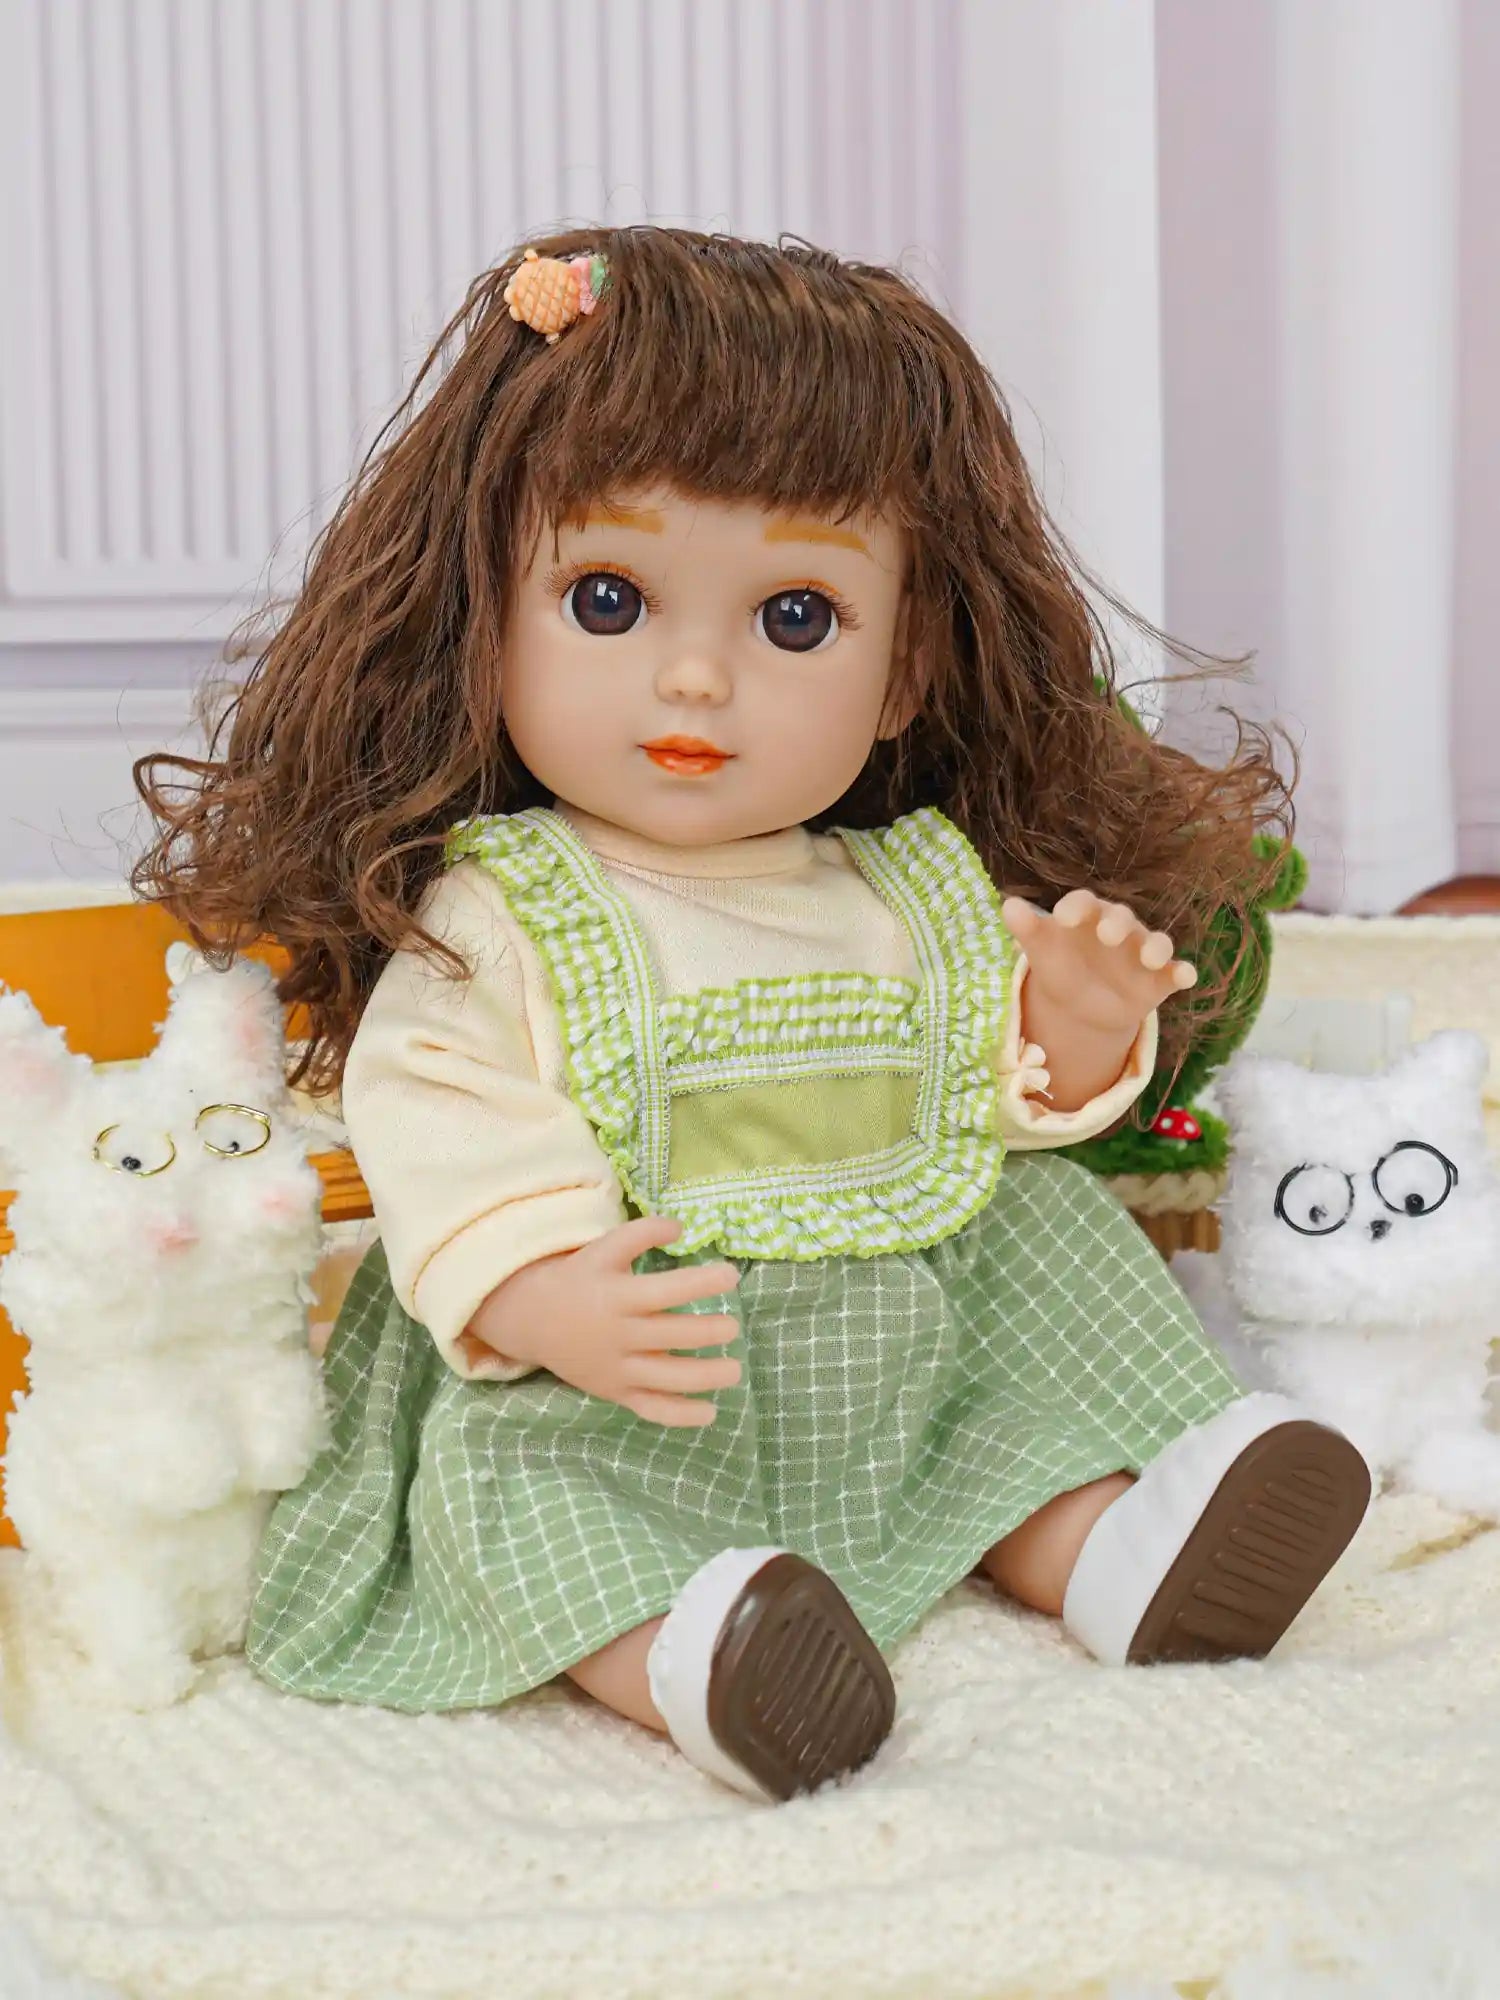 Doll waving in a layered outfit, with two fluffy dog toys and a green plant.